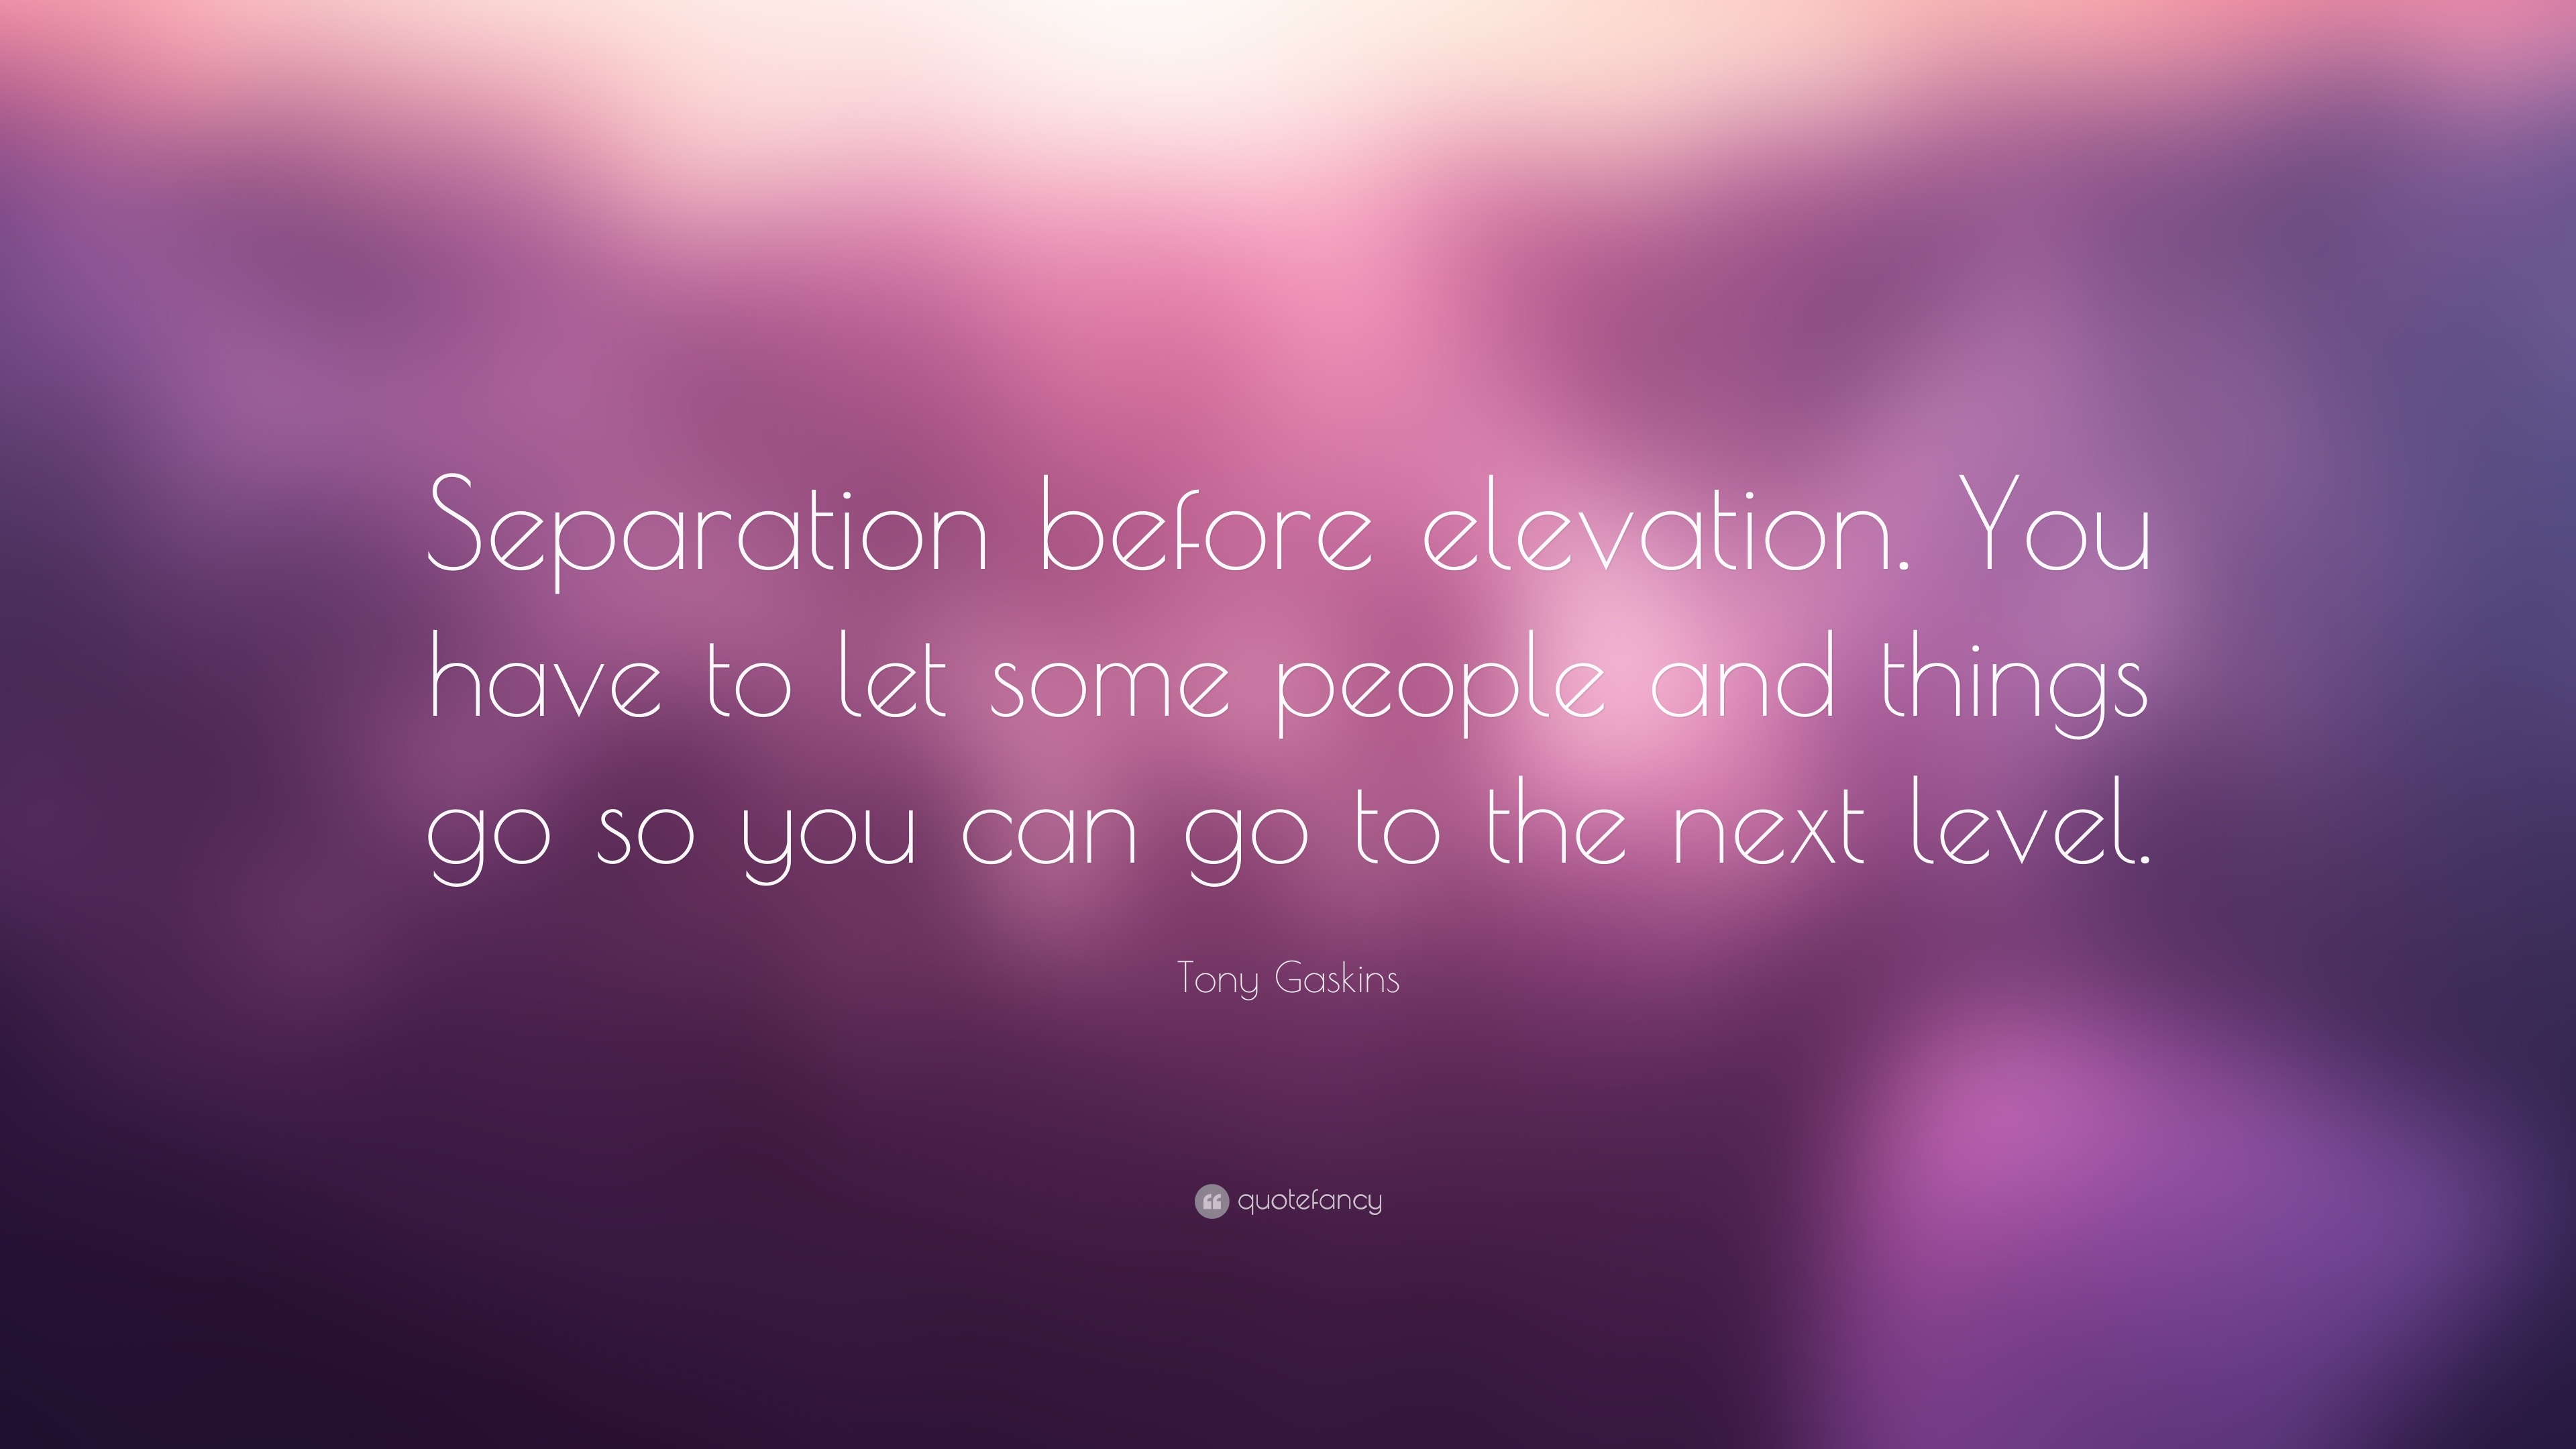 Quotes about seperation